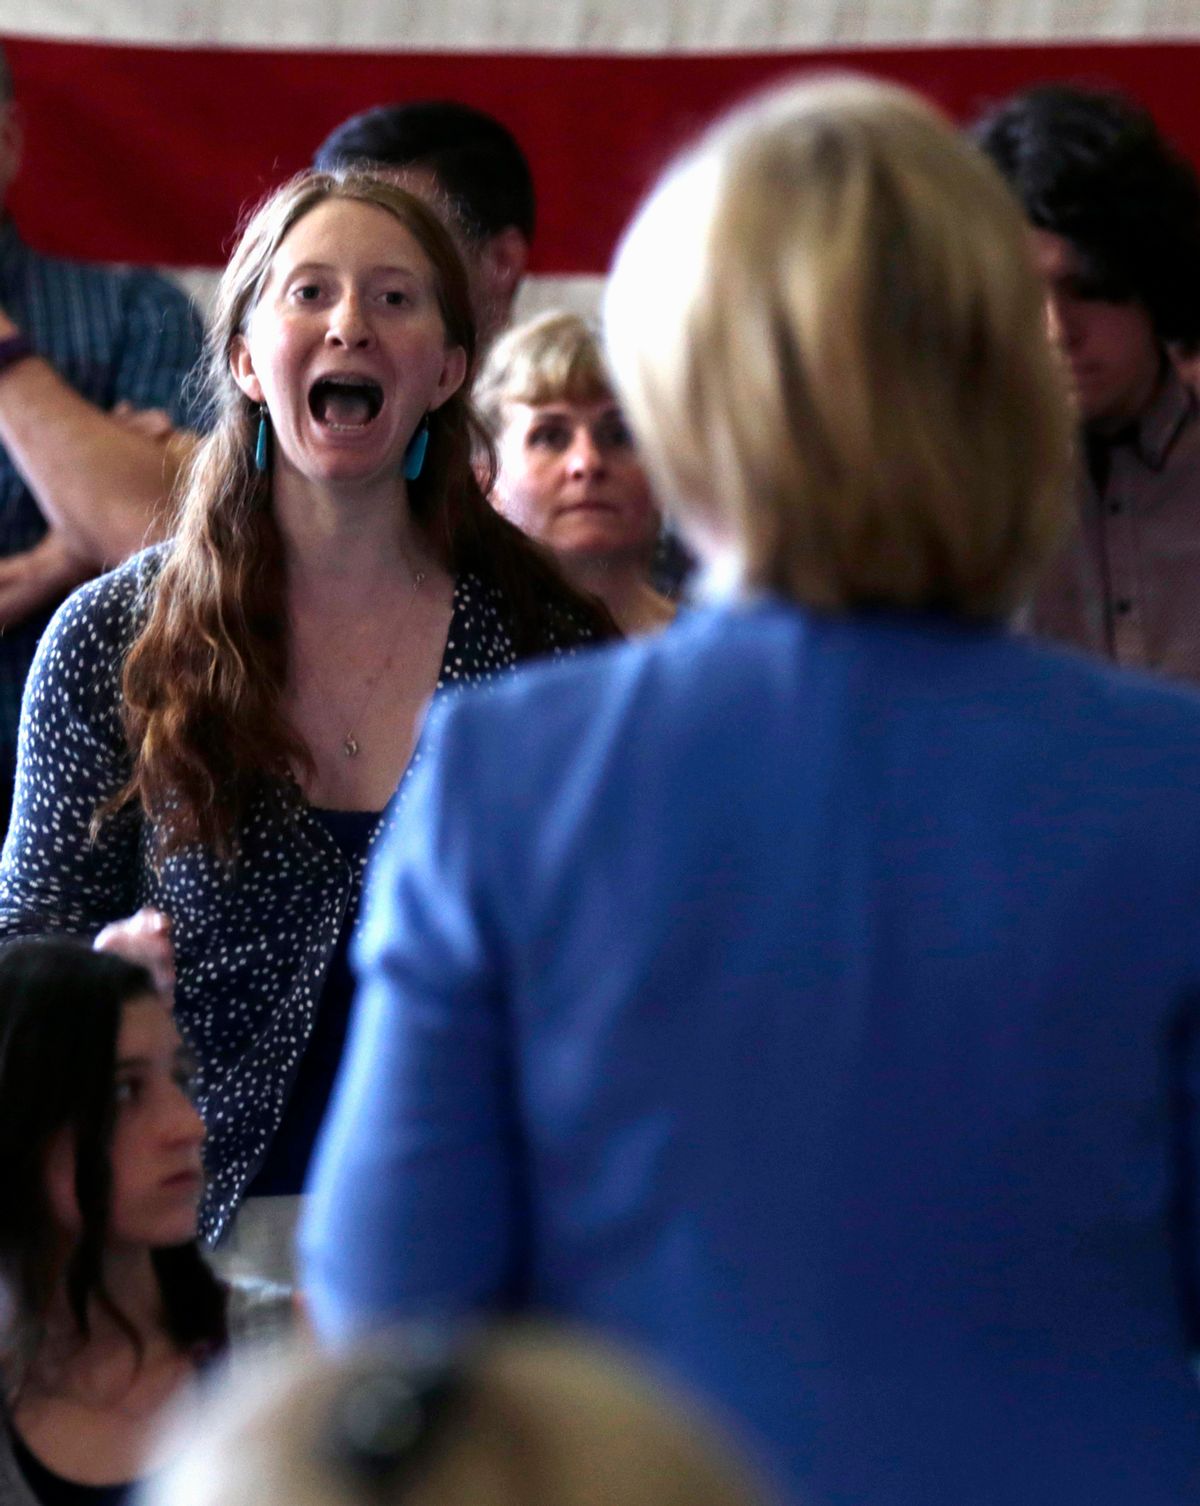 Giselle Hart of Dover, N.H., an environmental activist and student at the University of New Hampshire, interrupts and yells at Democratic presidential candidate Hillary Rodham Clinton, while asking a question during a town hall meeting in Dover, NH, Thursday, July 16, 2015. (AP Photo/Charles Krupa)  (AP)